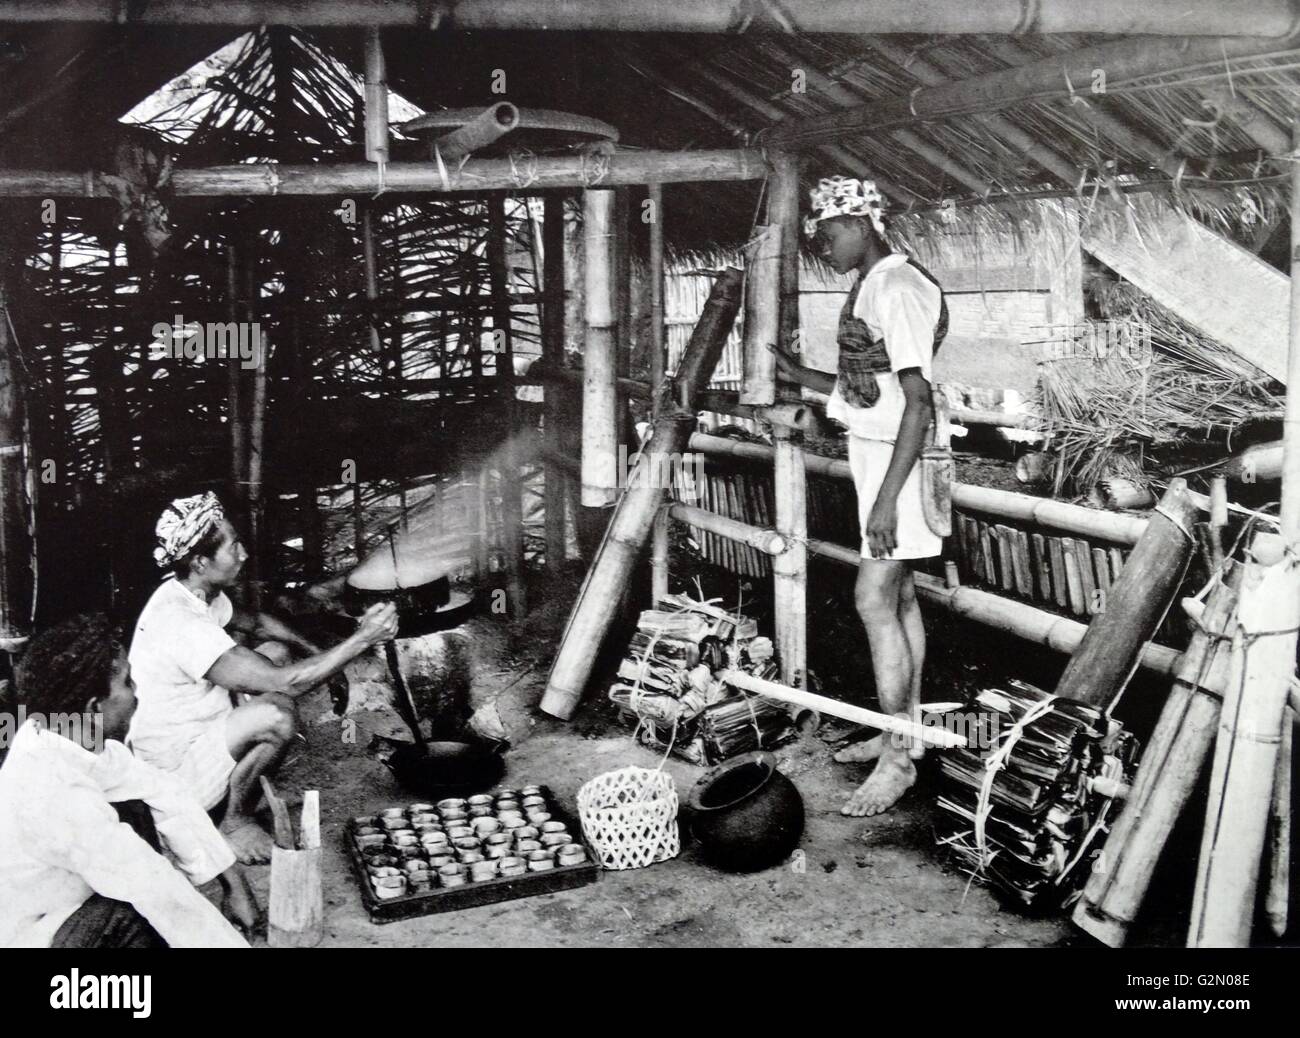 Photograph shows male figures in an Indonesian home cooking sugar spikes. Dutch East Indies, known as modern Indonesia. Dated c1935. Stock Photo